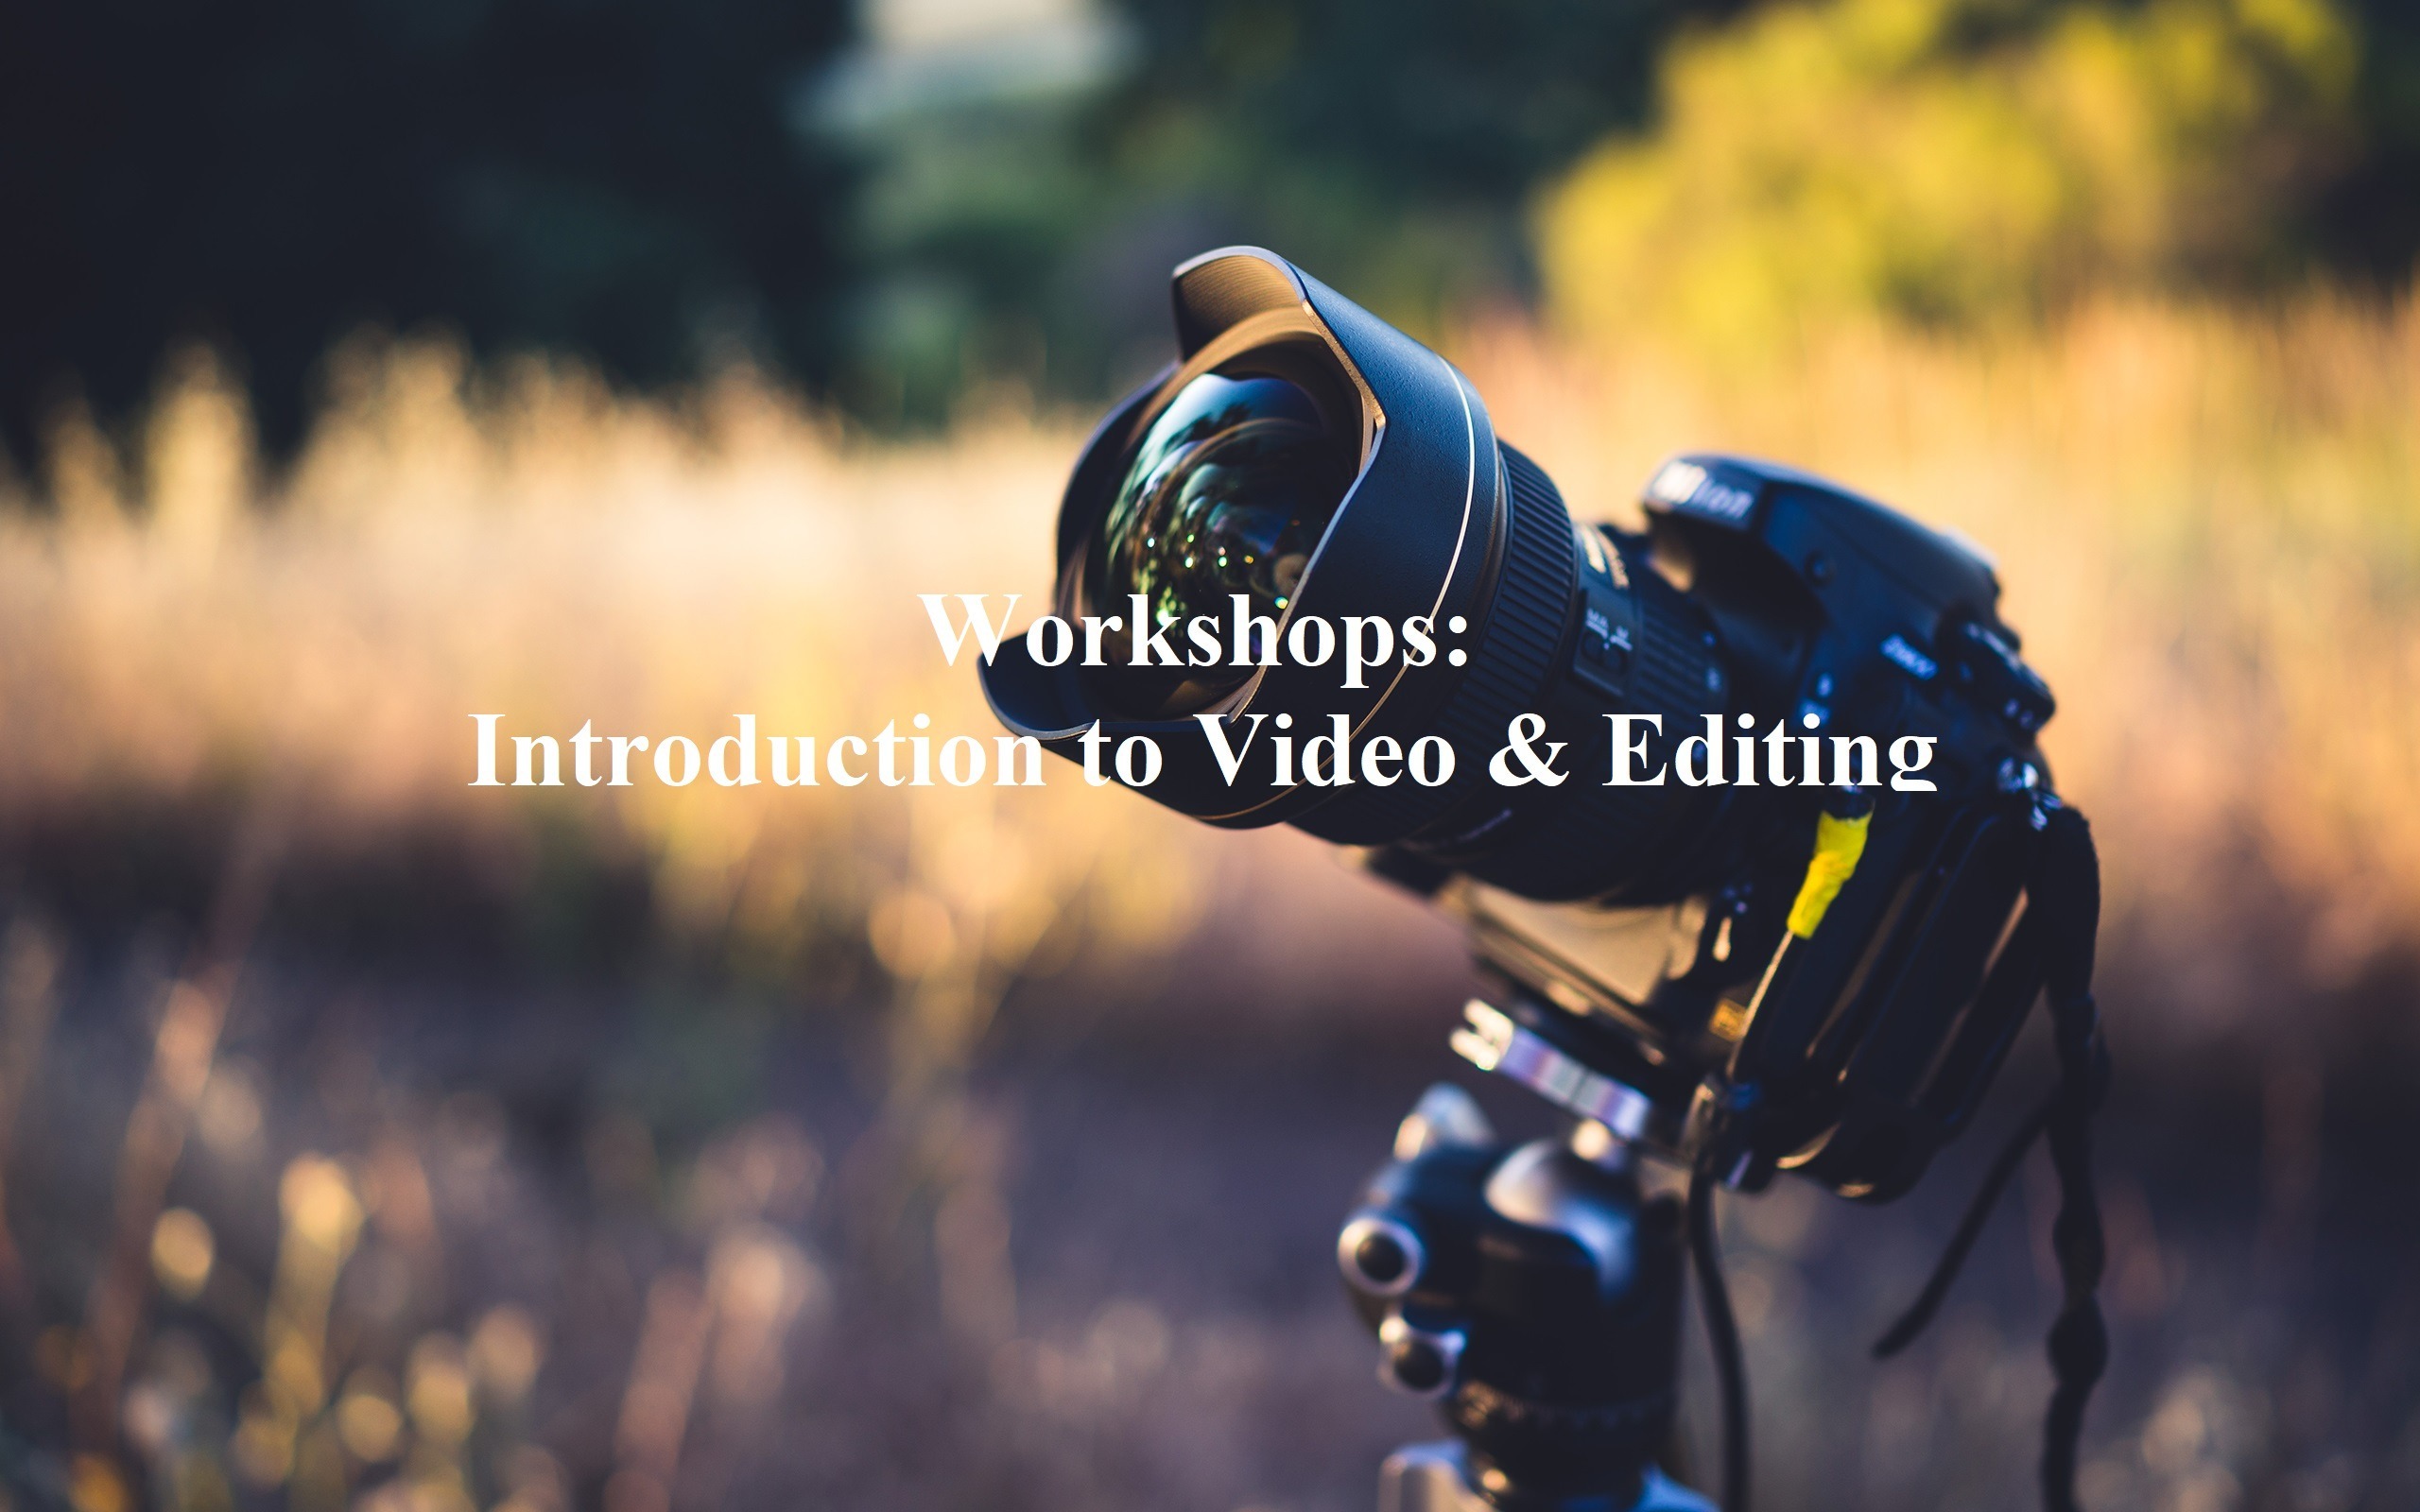 Workshops: Introduction to Video & Editing - Coming Soon in UAE